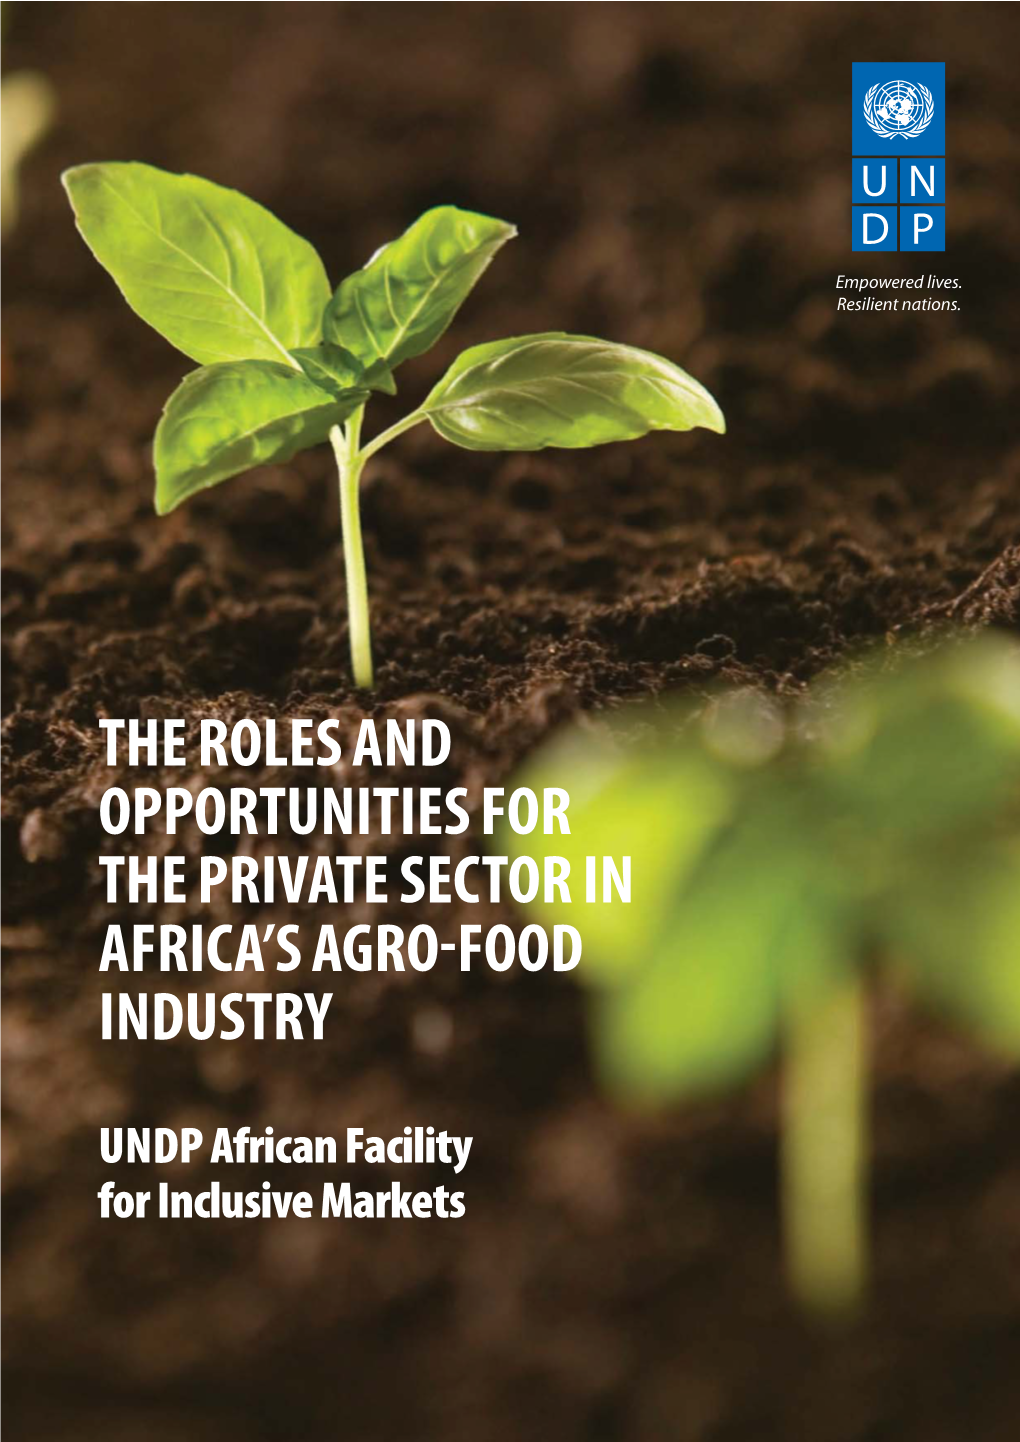 The Roles and Opportunities for the Private Sector in Africa's Agro-Food